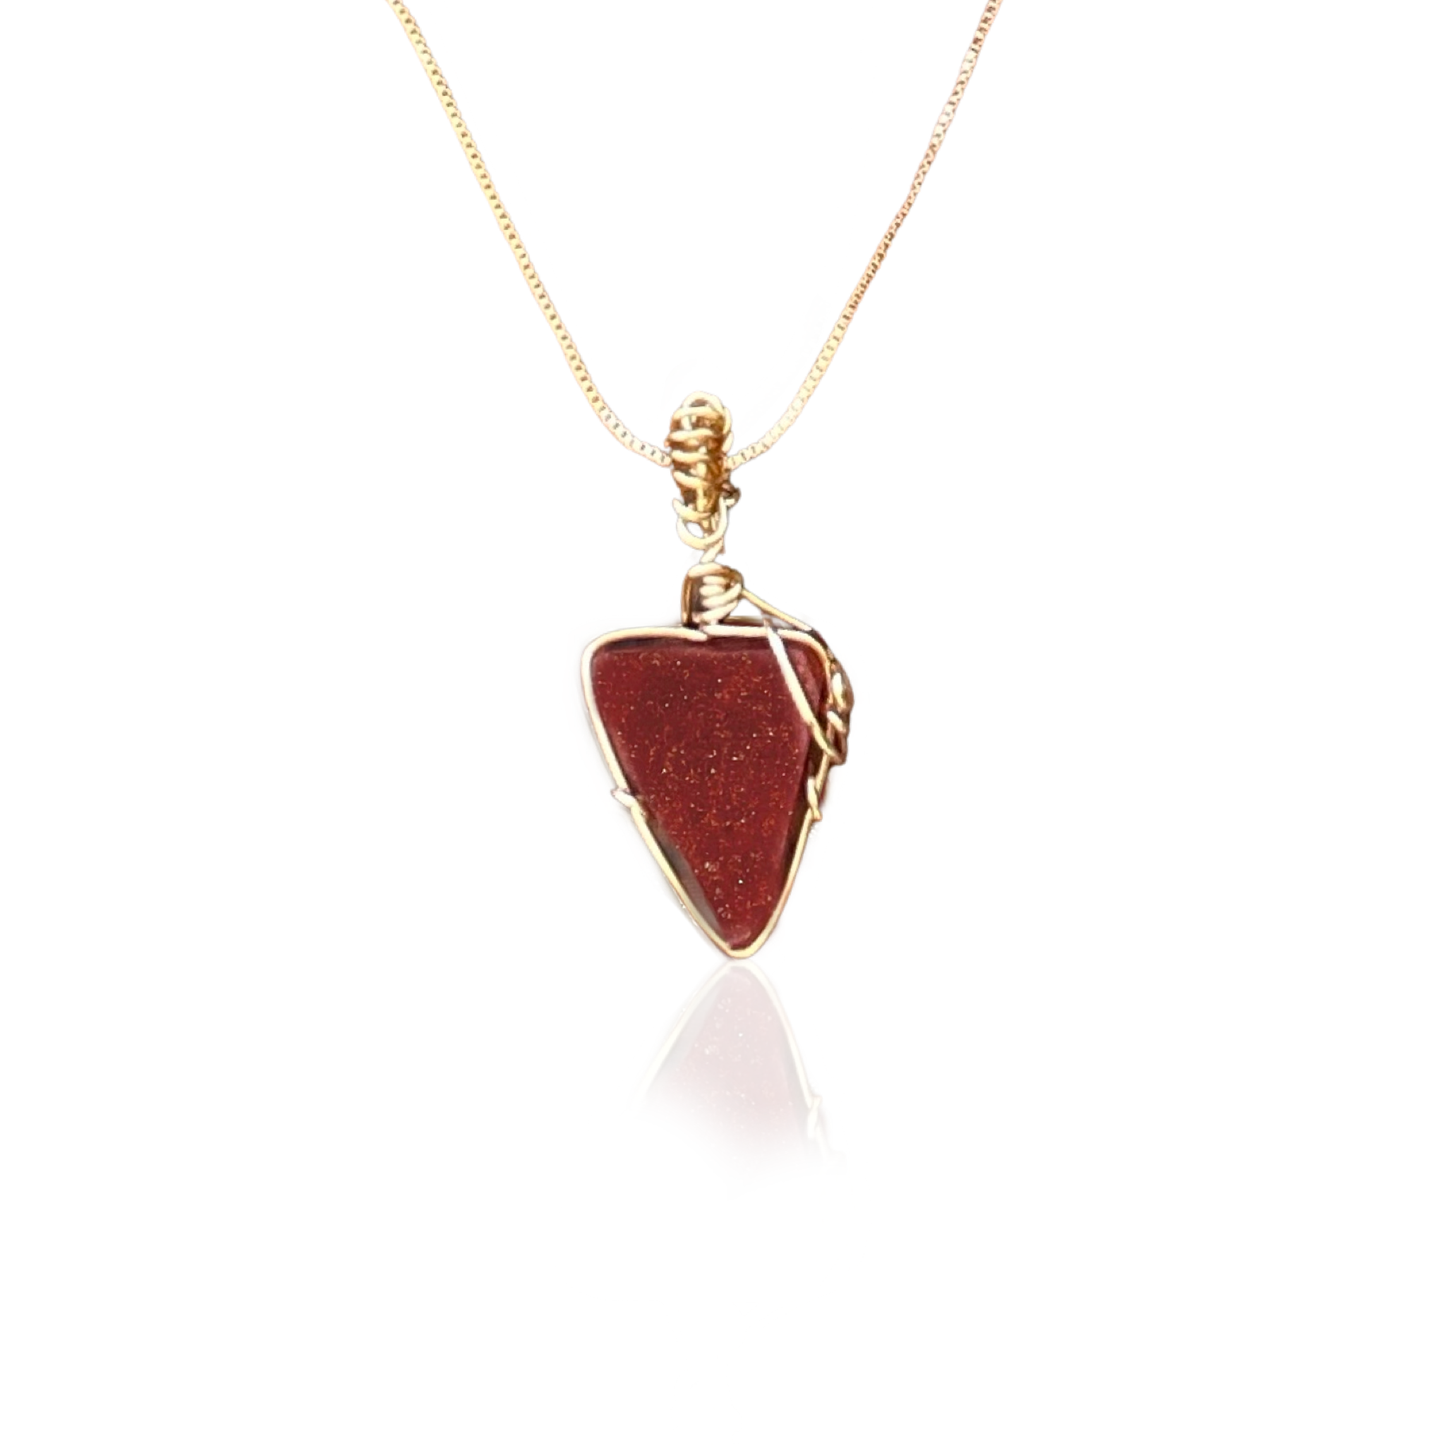 Jagged Pyramid Pendant Necklace